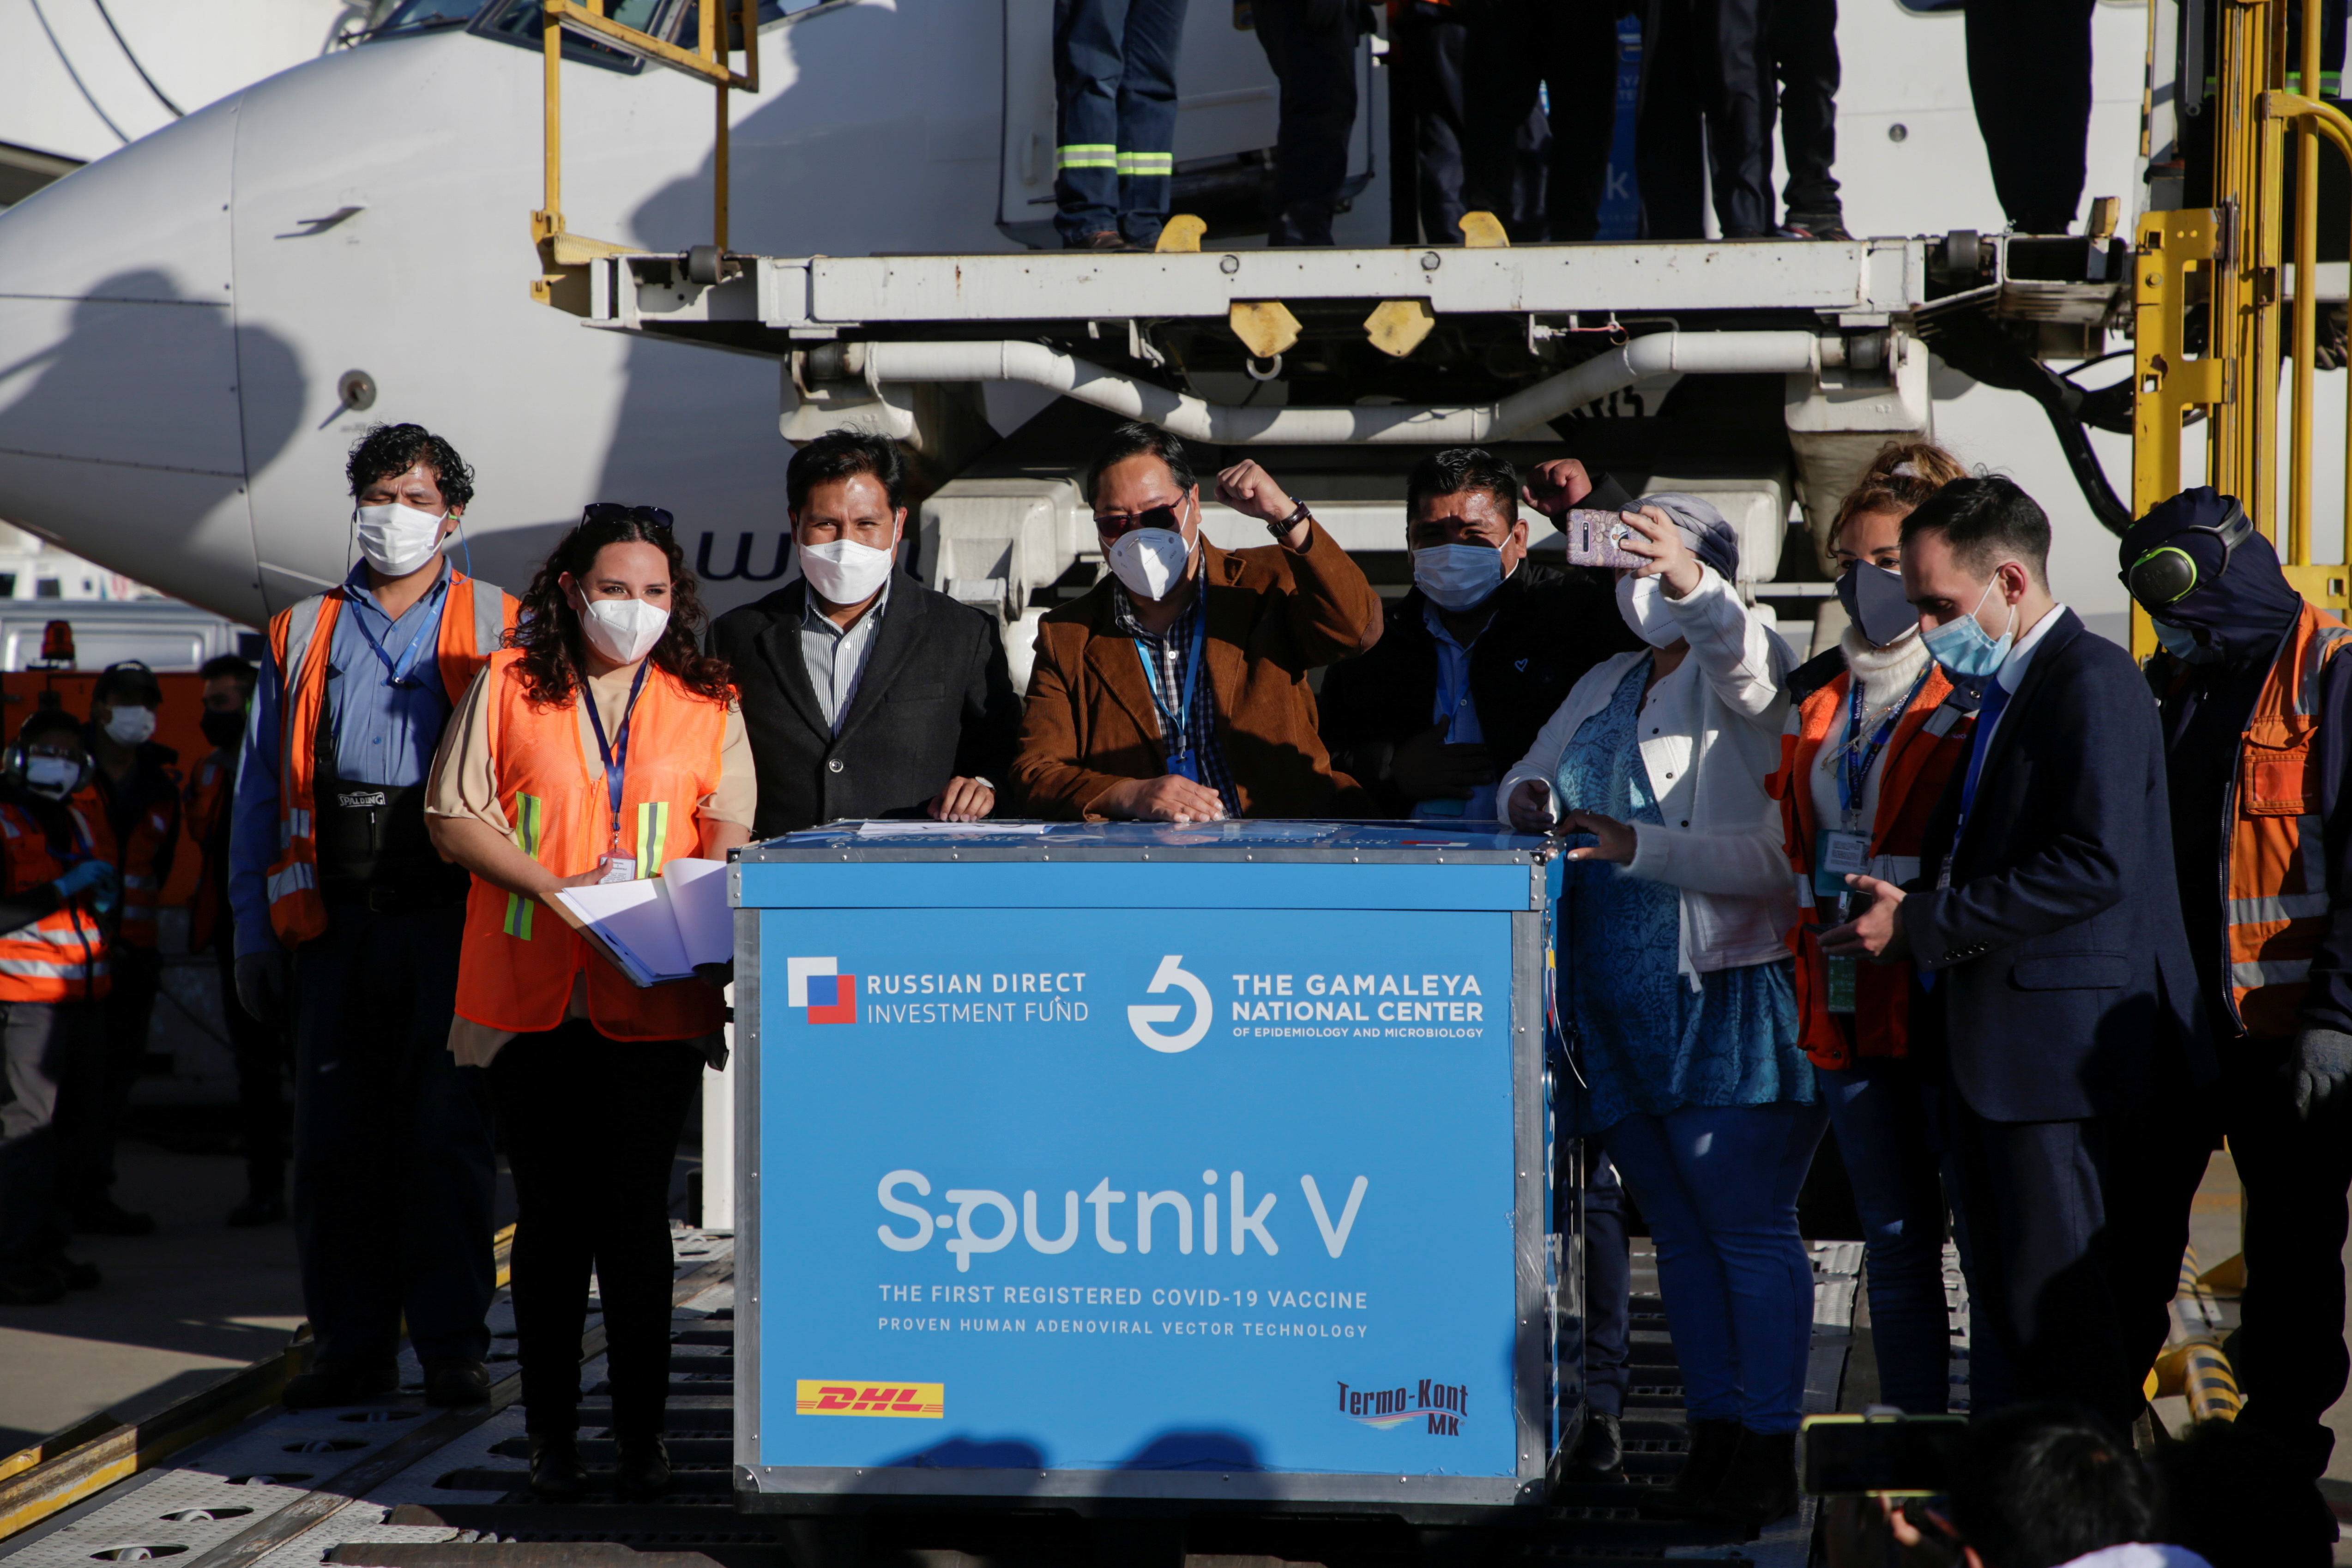 The first batch of the Sputnik V COVID-19 vaccine arrives in Bolivia